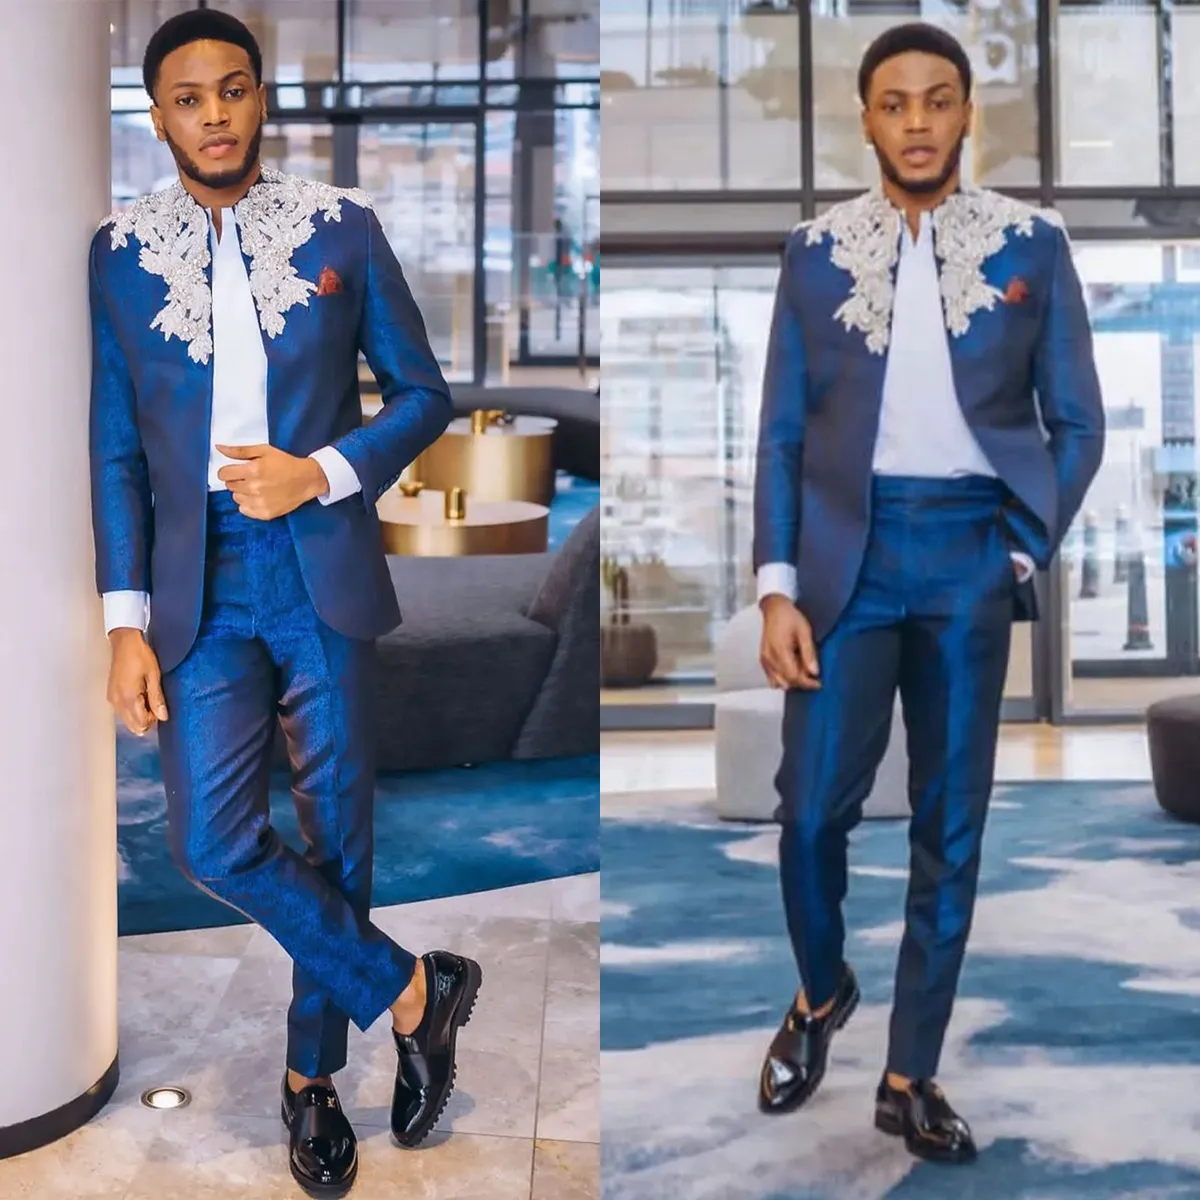 Navy Blue Beaded Wedding Suit With Appliques For Men Slim Fit Formal Blue  Groom Tuxedo With Custom Made Pants And Jacket From Greatvip, $84.88